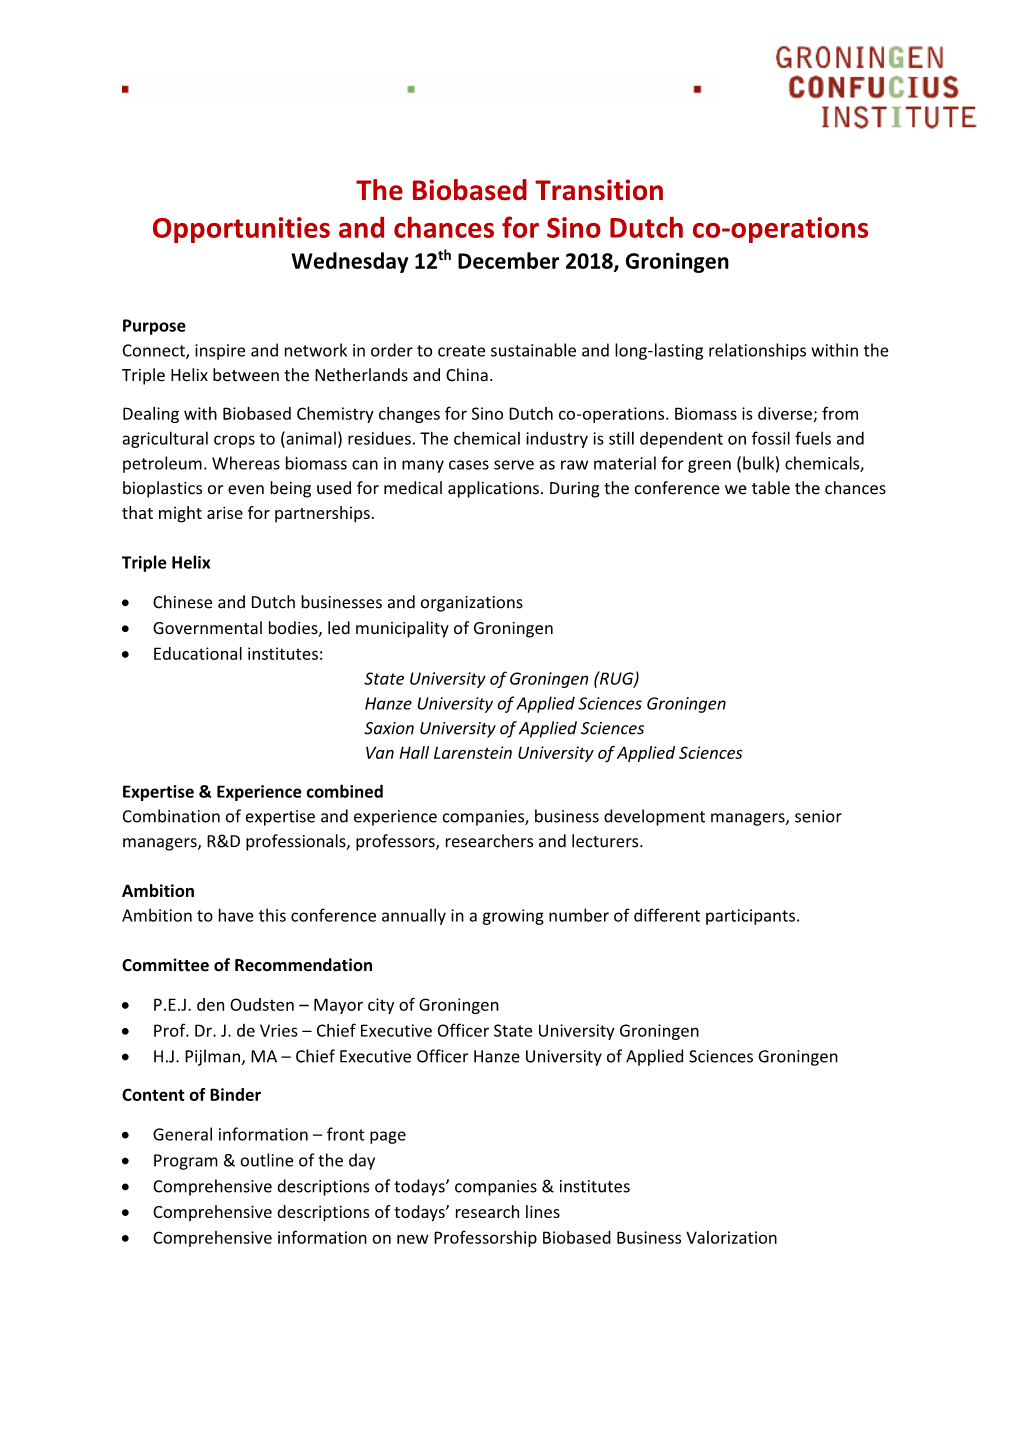 The Biobased Transition Opportunities and Chances for Sino Dutch Co-Operations Wednesday 12Th December 2018, Groningen